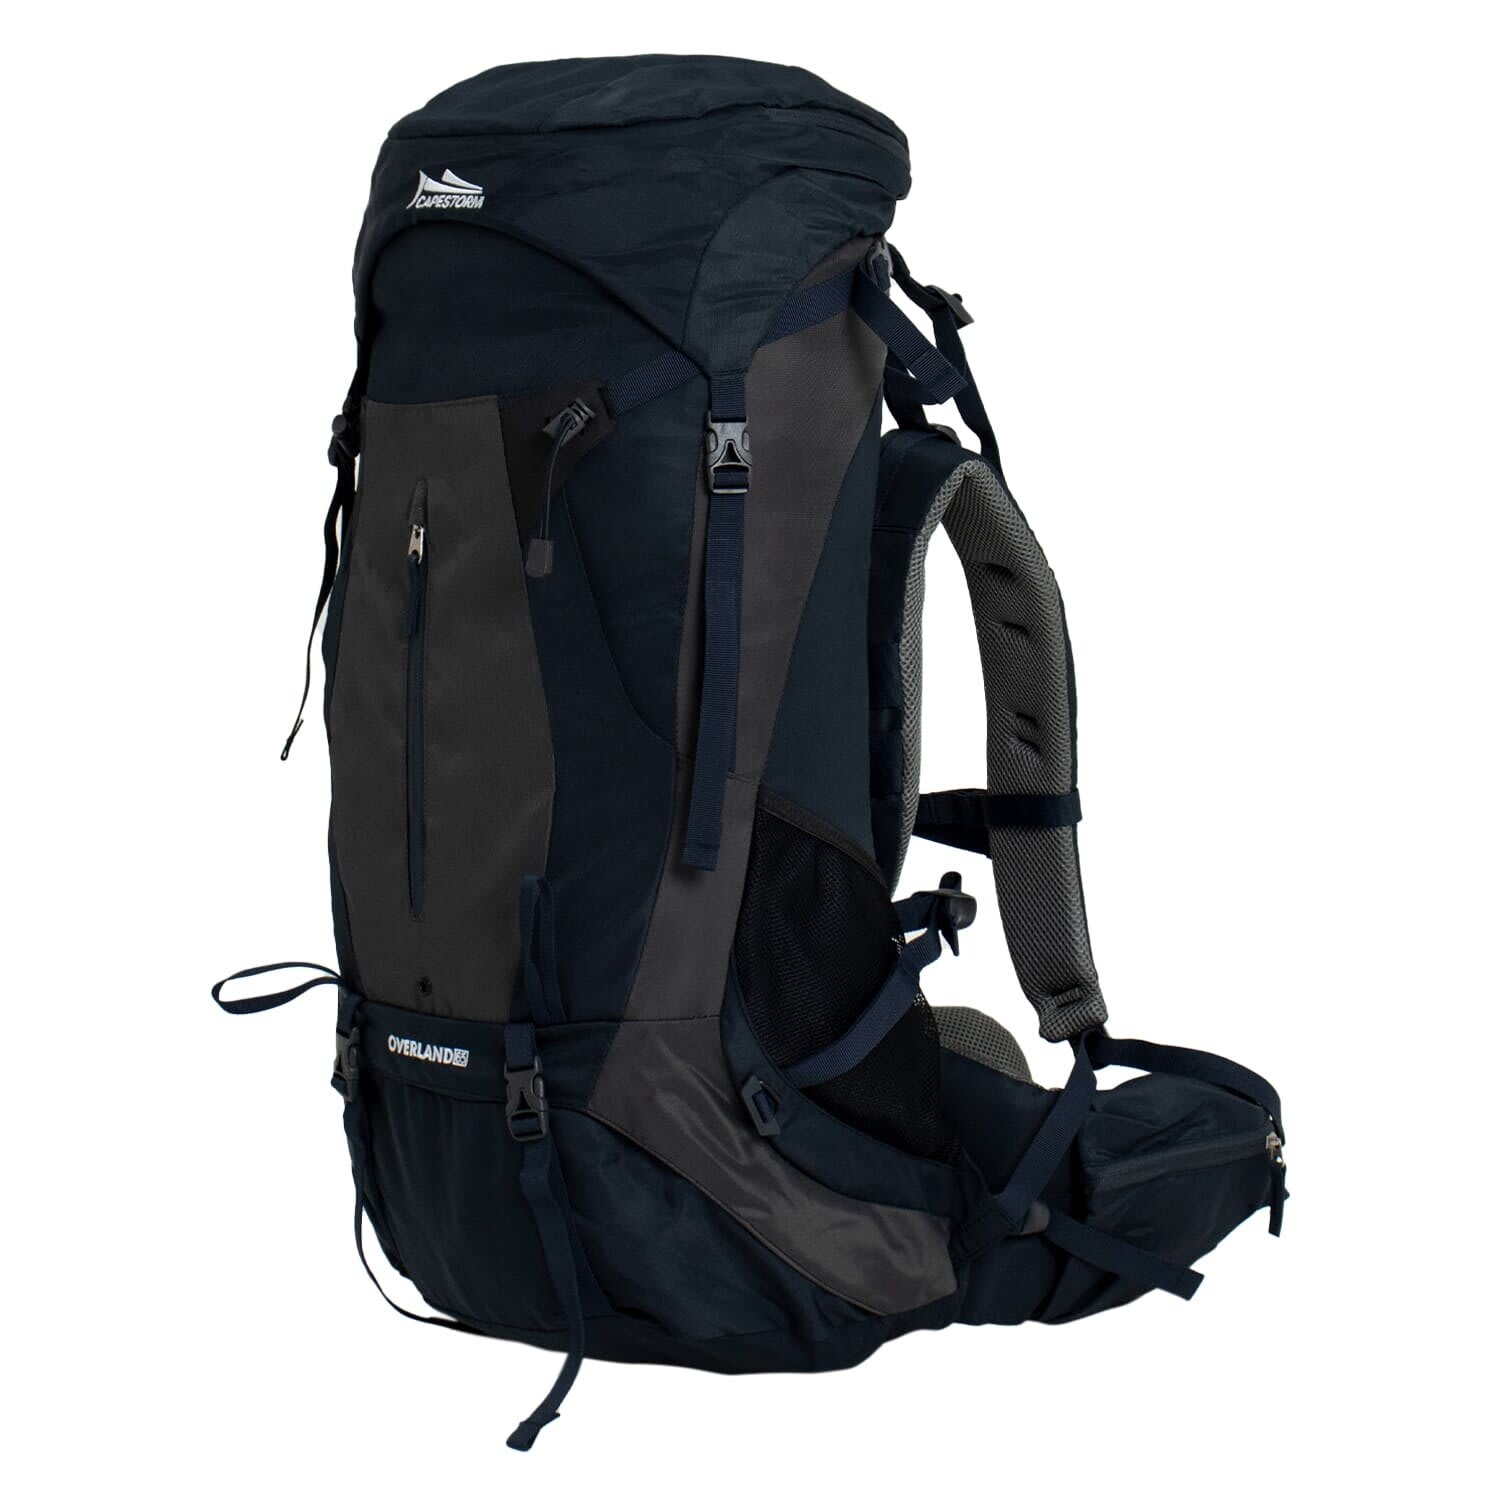 Capestorm Overland 65L Hiking Pack | 1015096 | Outdoor Warehouse